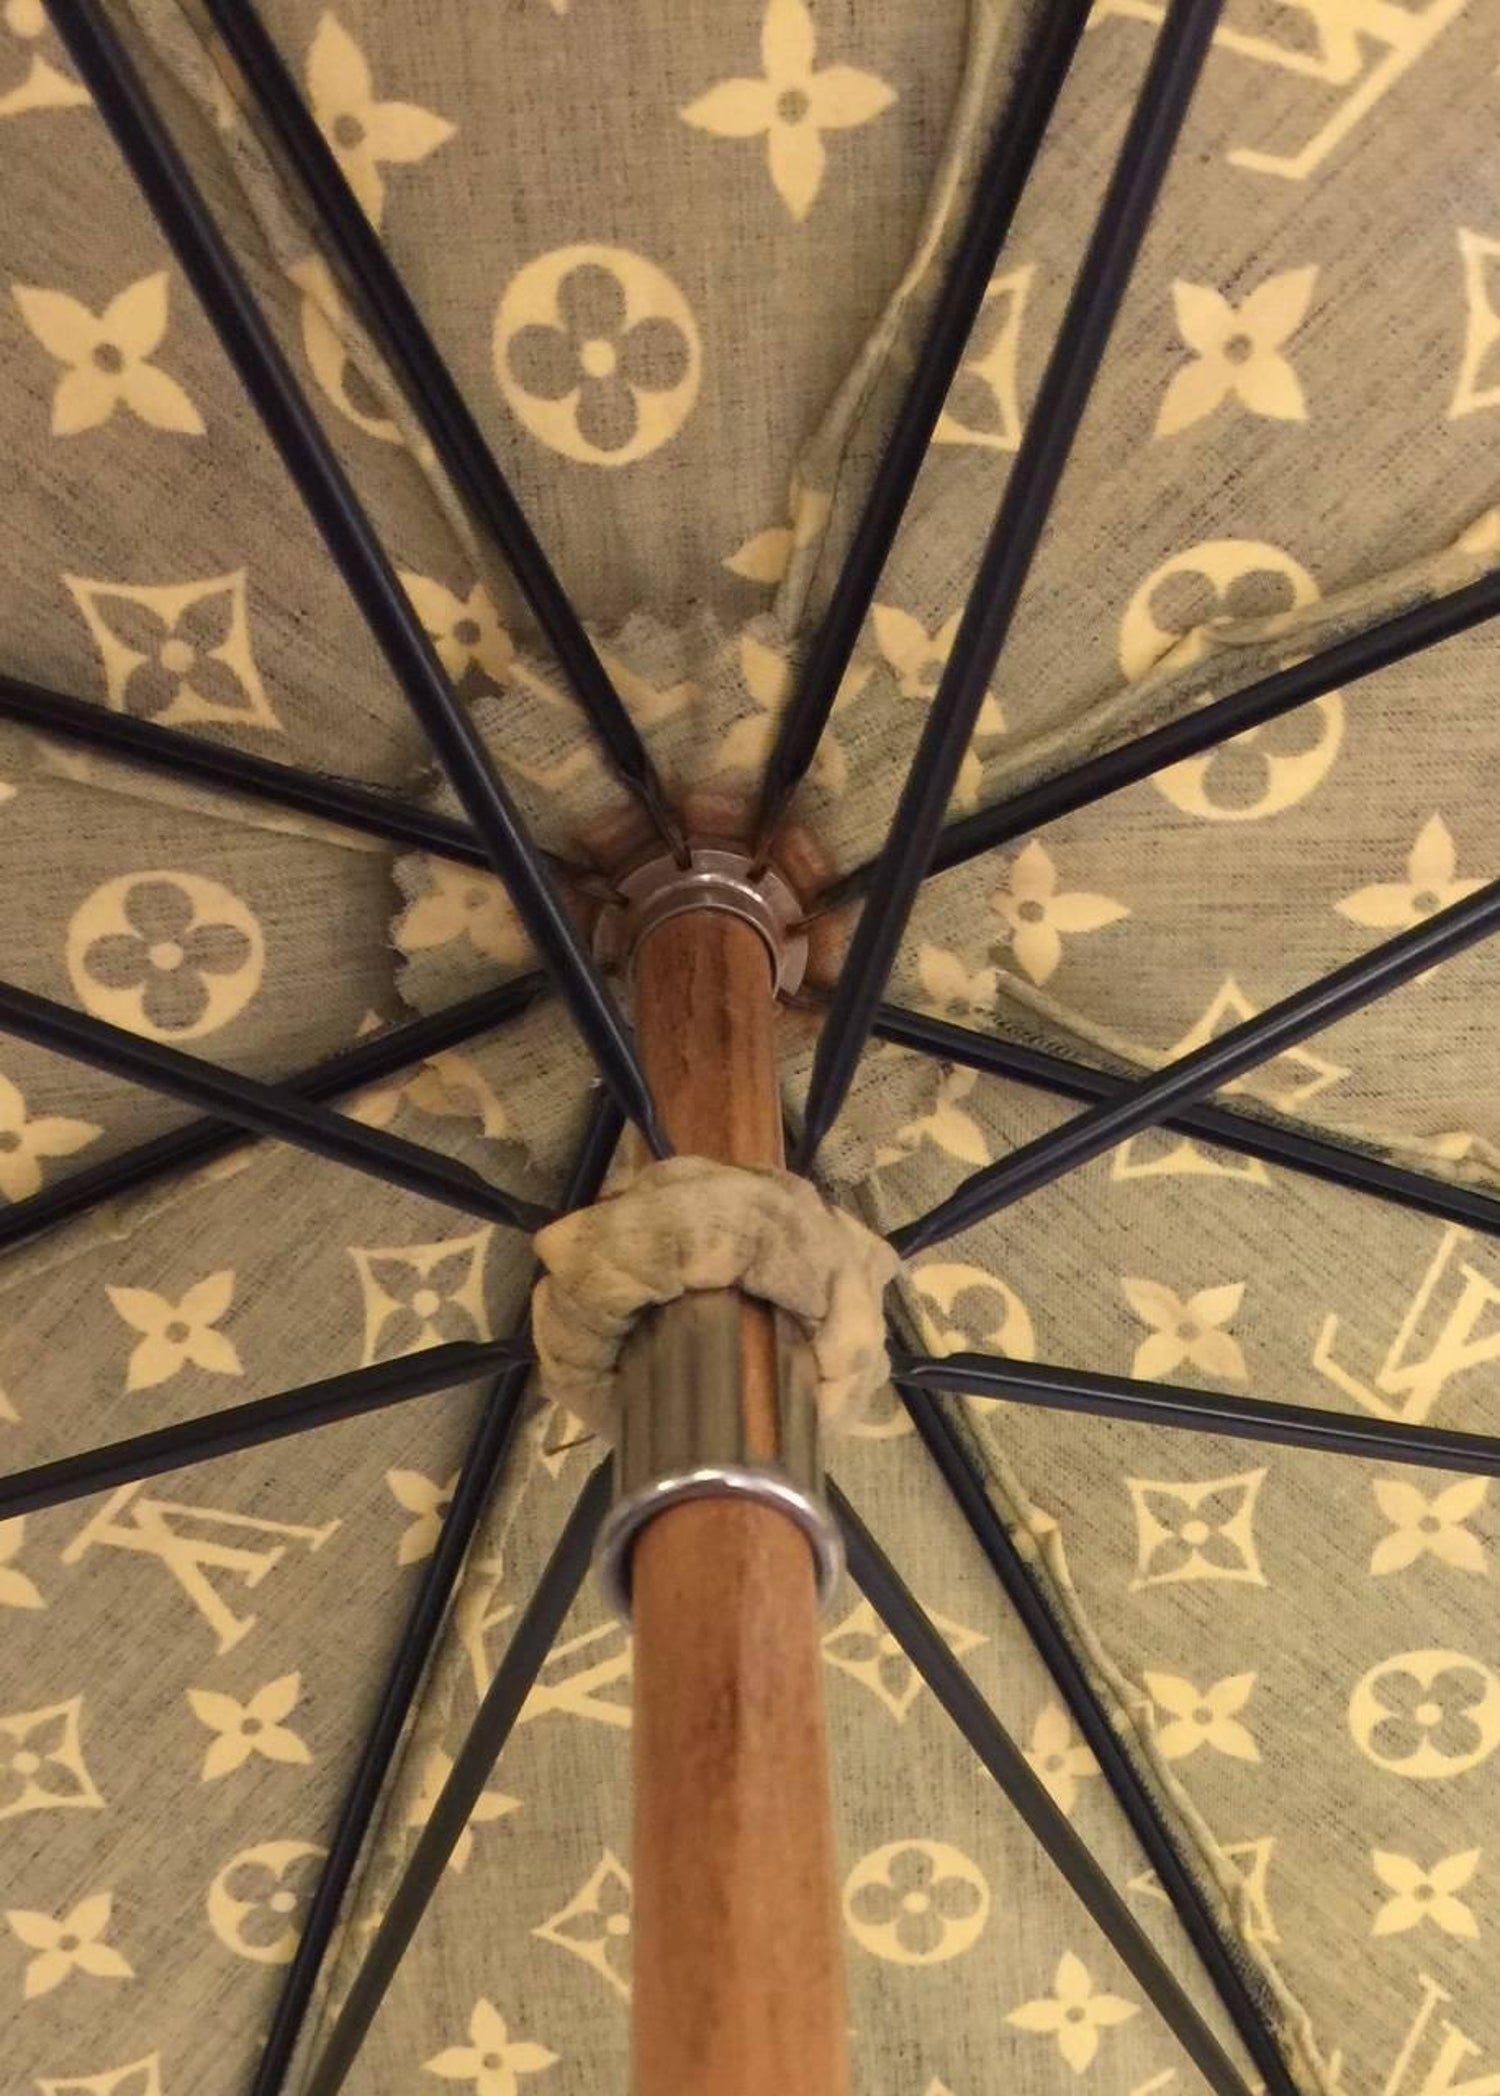 Vintage 1960's Louis Vuitton Umbrella Made In France for Sale in Ontario,  CA - OfferUp